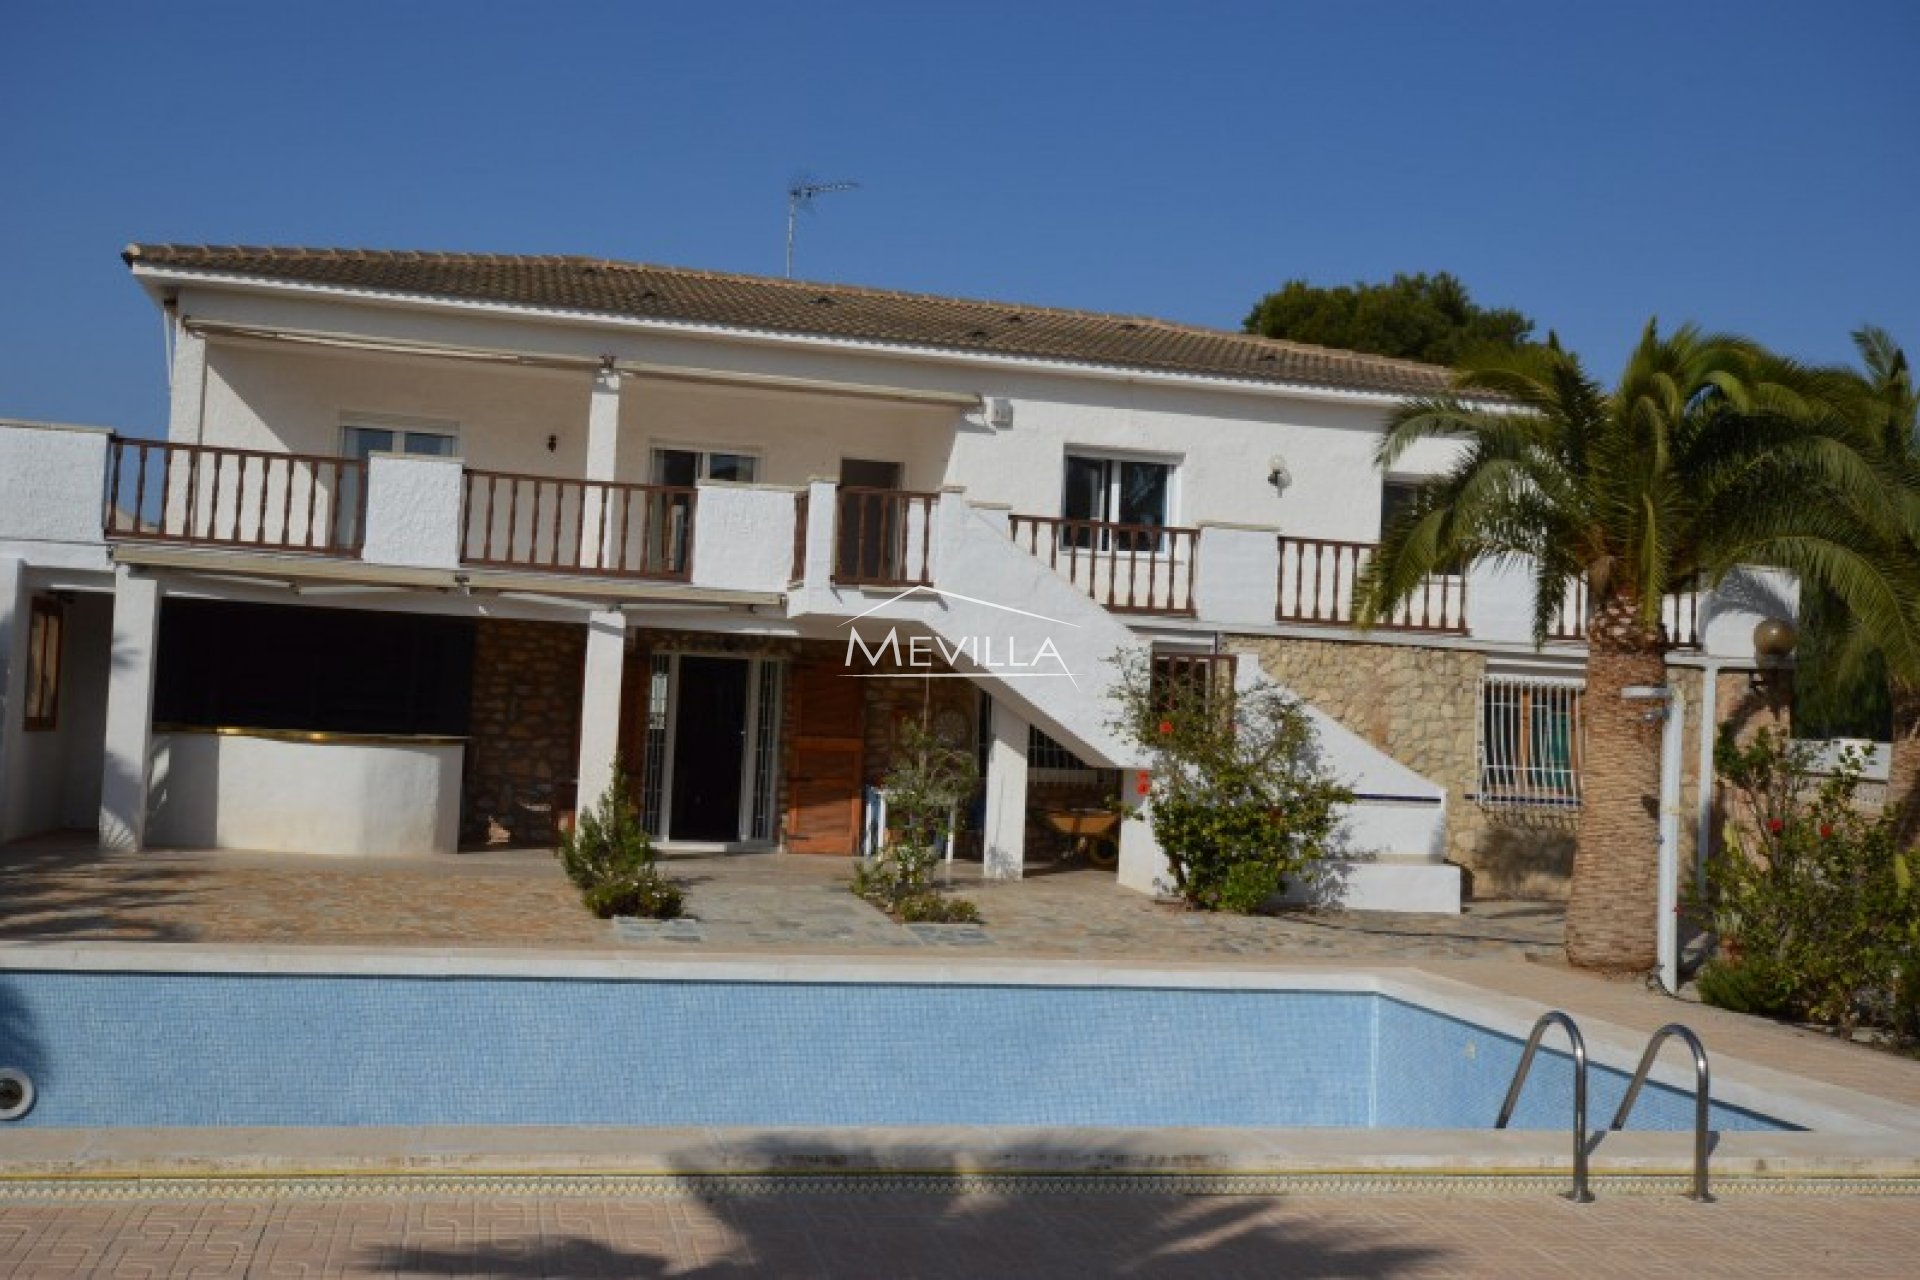 BIG VILLA FOR TWO FAMILIES ON A HUGE PLOT OF 1,200 M2 FOR SALE IN LA ZENIA